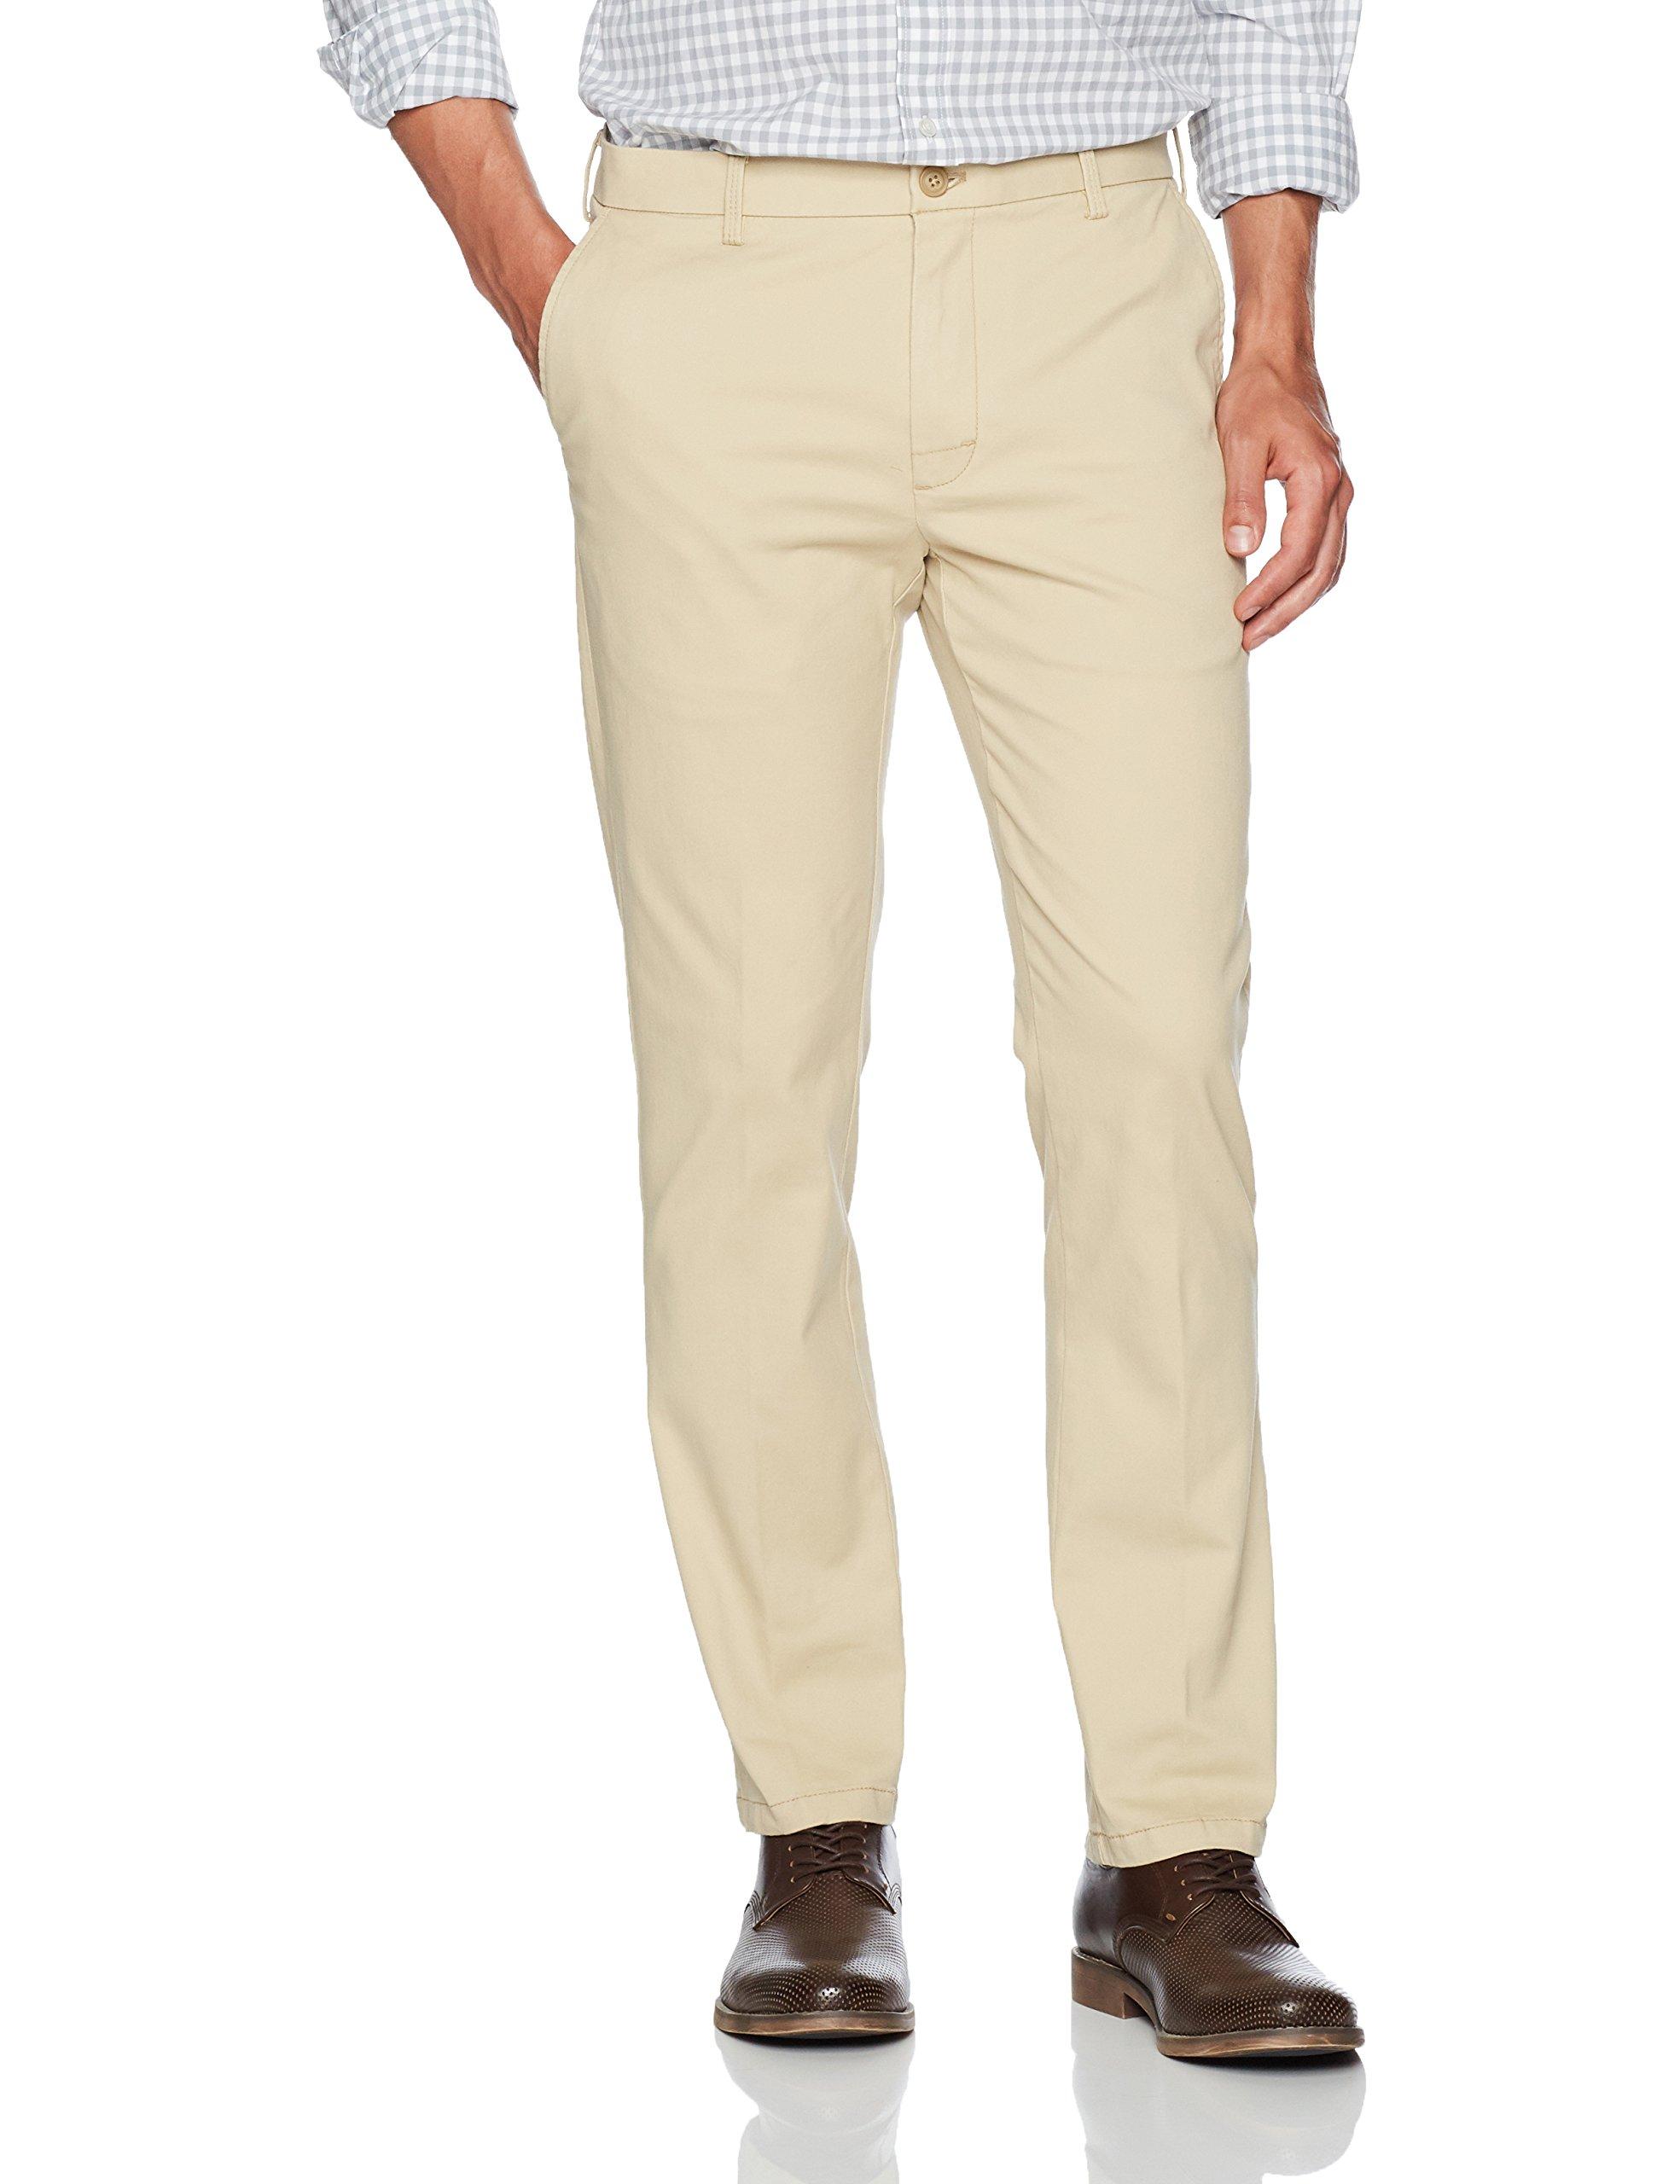 Izod Saltwater Stretch Flat Front Slim Fit Chino Pant in Pale Khaki ...